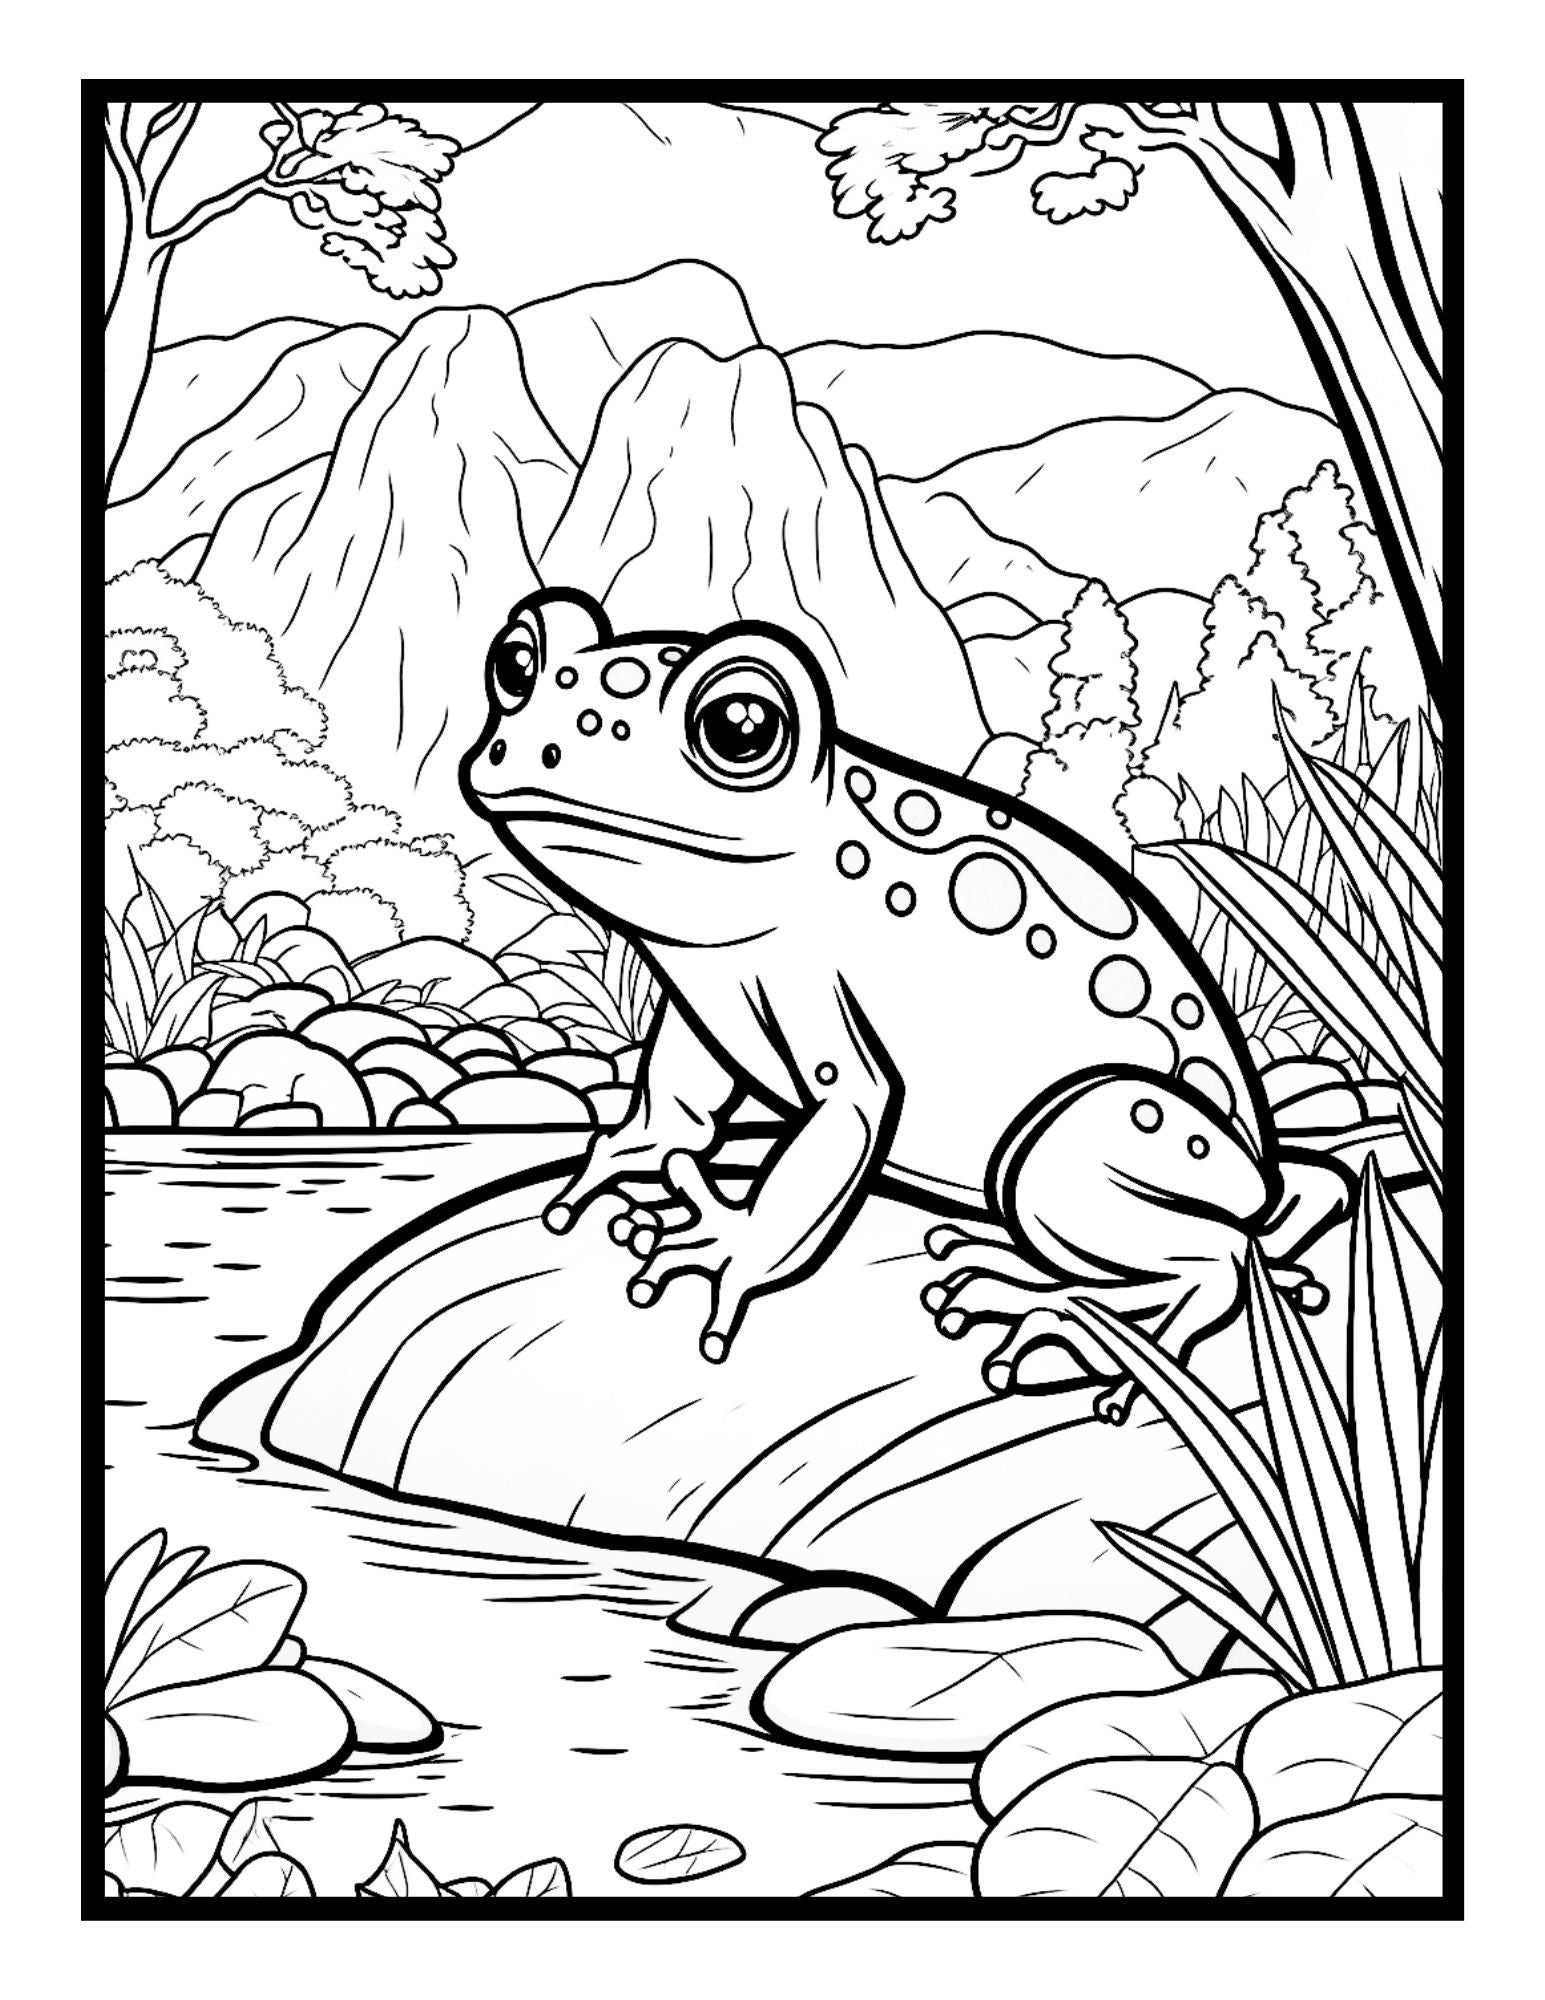 Cute Toad Coloring Book Frog Coloring Book For Adult And Kids